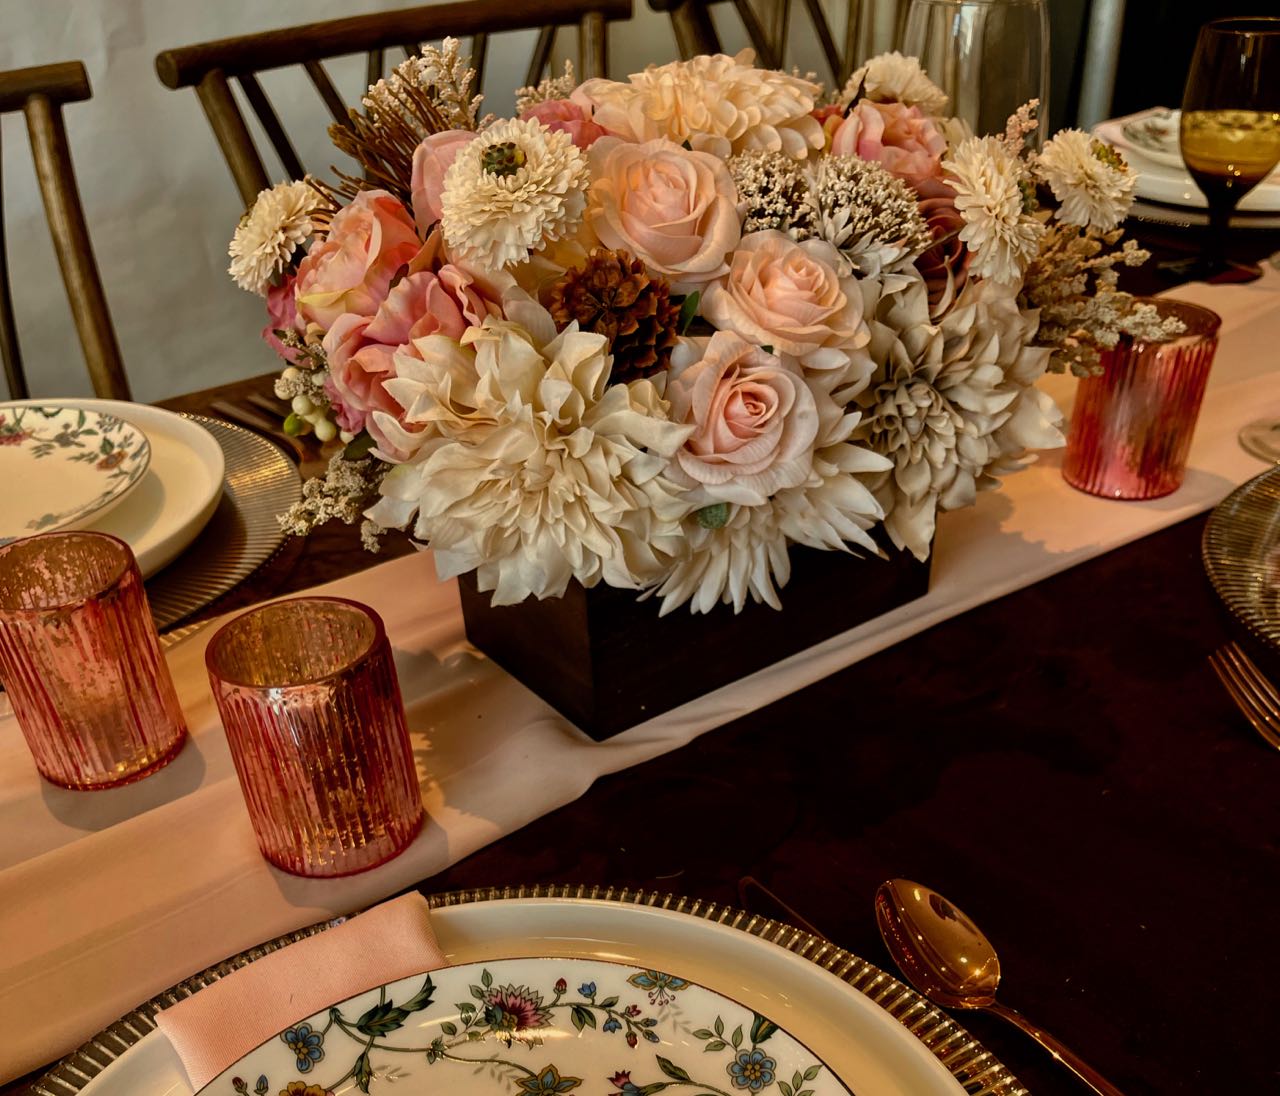 This soft-toned cream, blush and rich brown centrepiece features earth elements such as pine cones and chocolate brown pincushions. This earthy heartiness is juxtaposed with the delicate petals of large pompom dahlias, cream sunflowers, blush floribunda roses, champagne hydrangeas, and accented with cream snowberries.  This Bohemian inspired creation is enveloped by muted grey-green seeded eucalyptus and finally finished in an espresso stained wood box (L8”x W4”x H